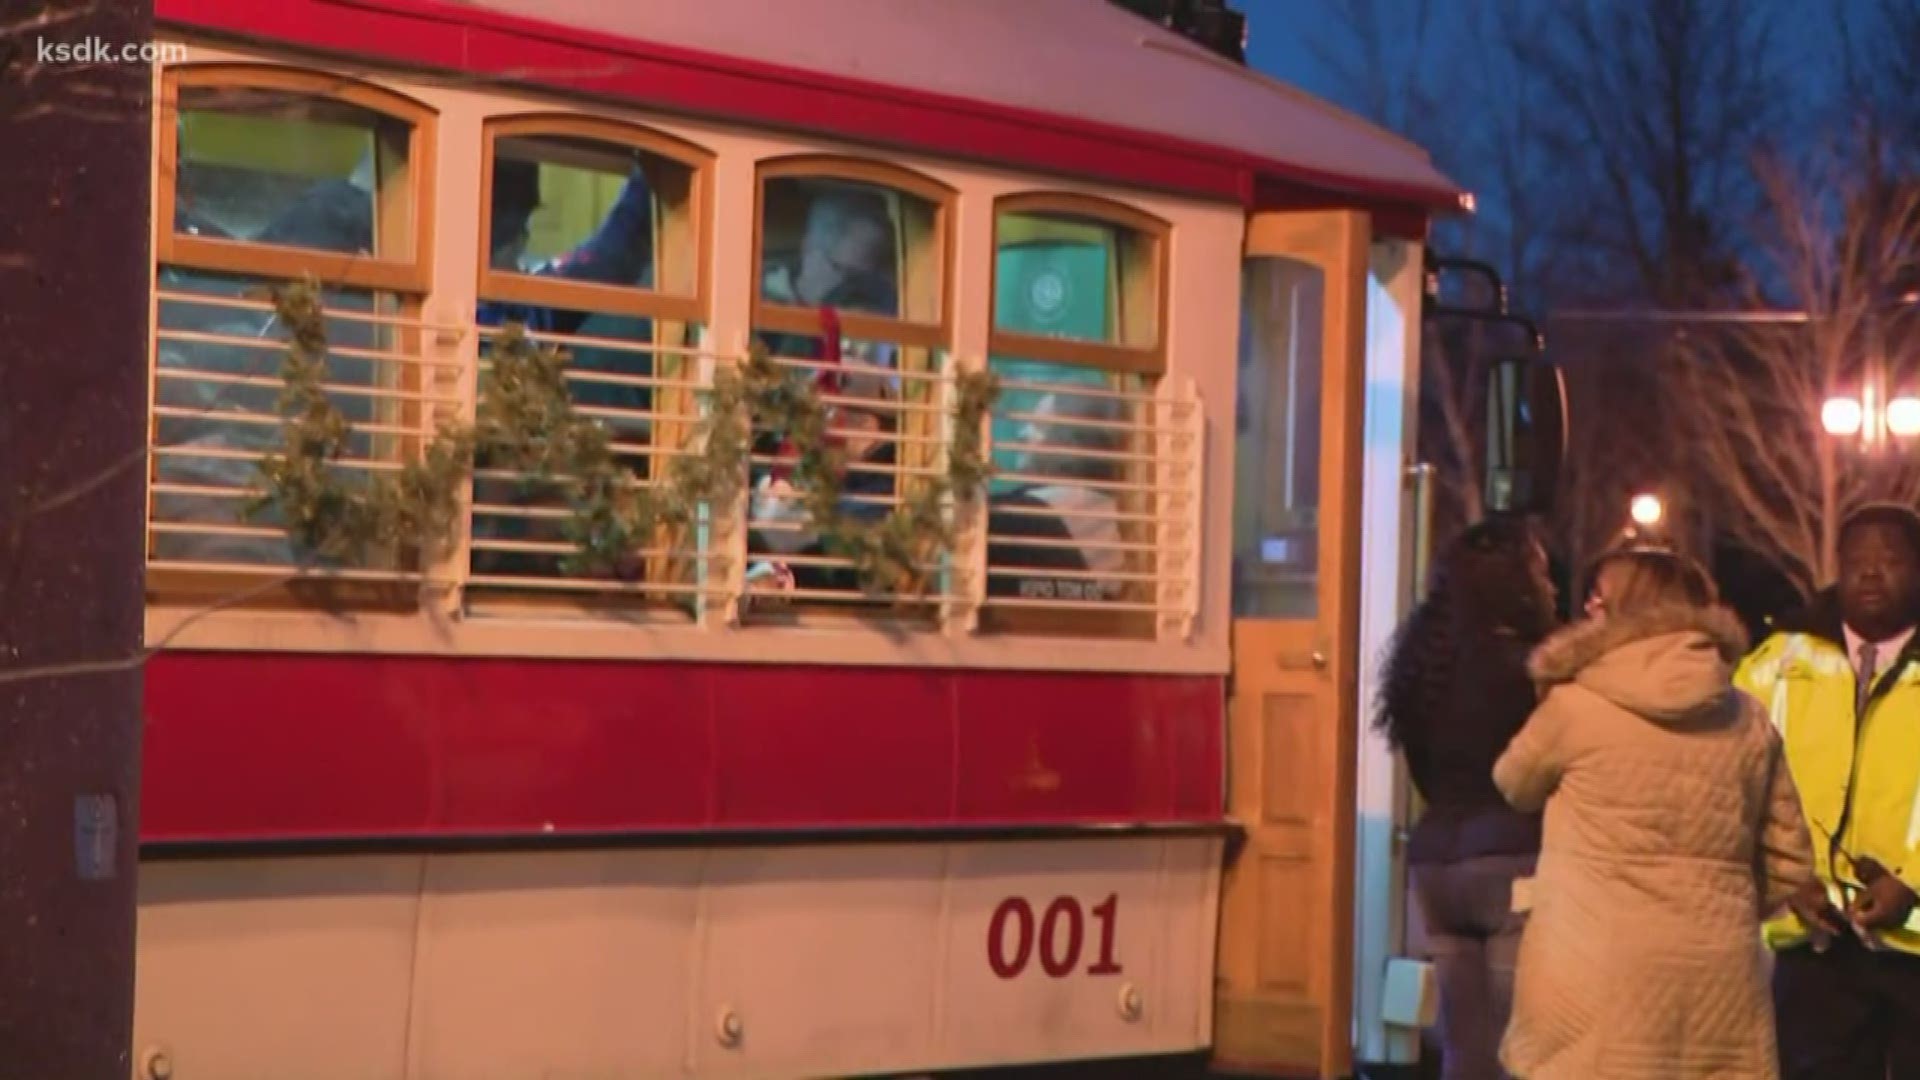 The streetcar will shut down Sunday after years of setbacks, delays and financial woes